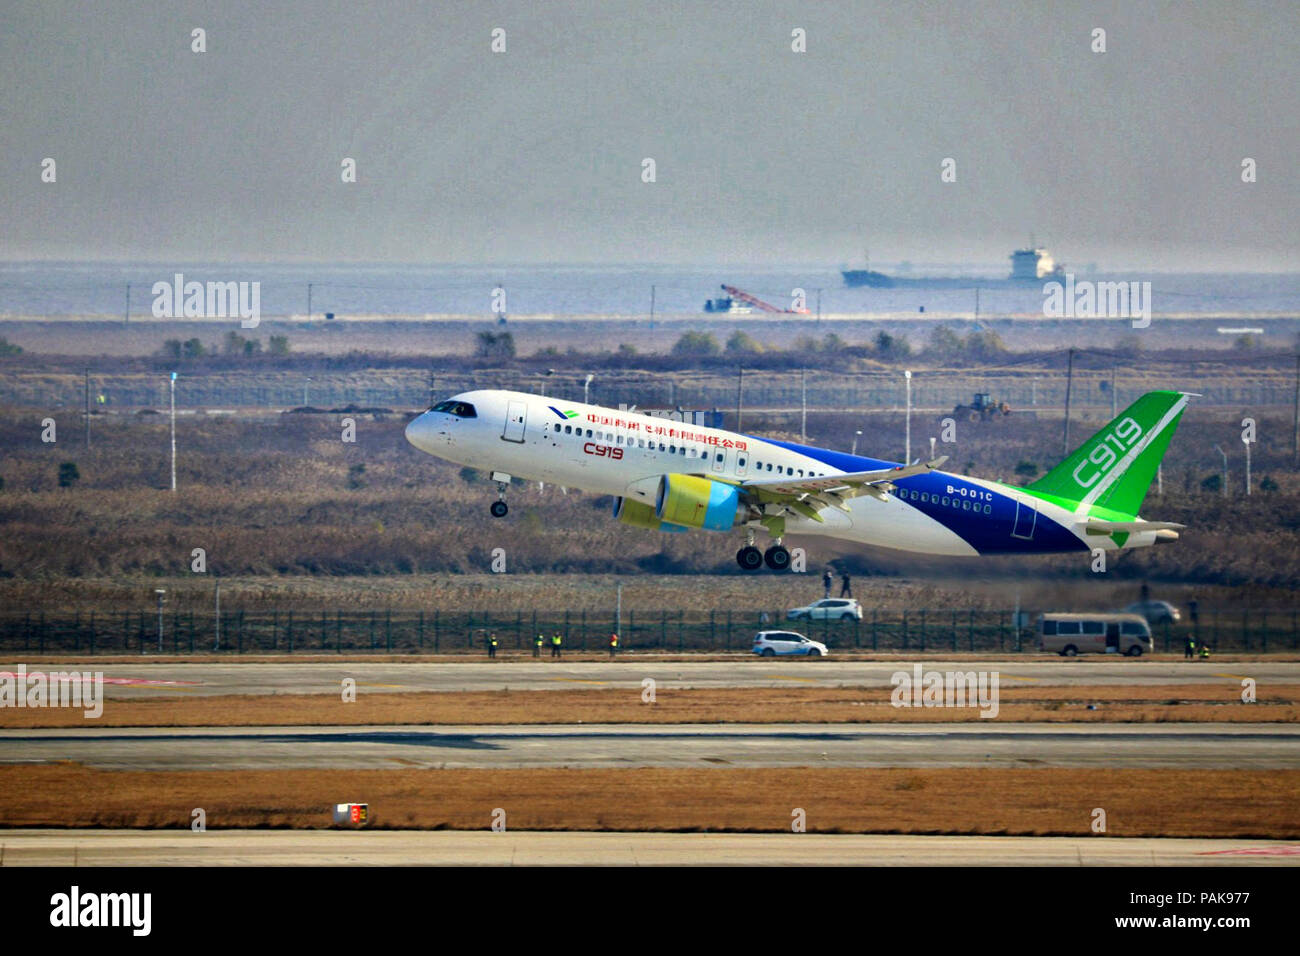 Beijing, China. 23rd July, 2018. The No.102 C919 plane makes a successful maiden flight on Dec. 17, 2017. This year marks the 40th anniversary of China's reform and opening-up policy. Credit: Xinhua/Alamy Live News Stock Photo